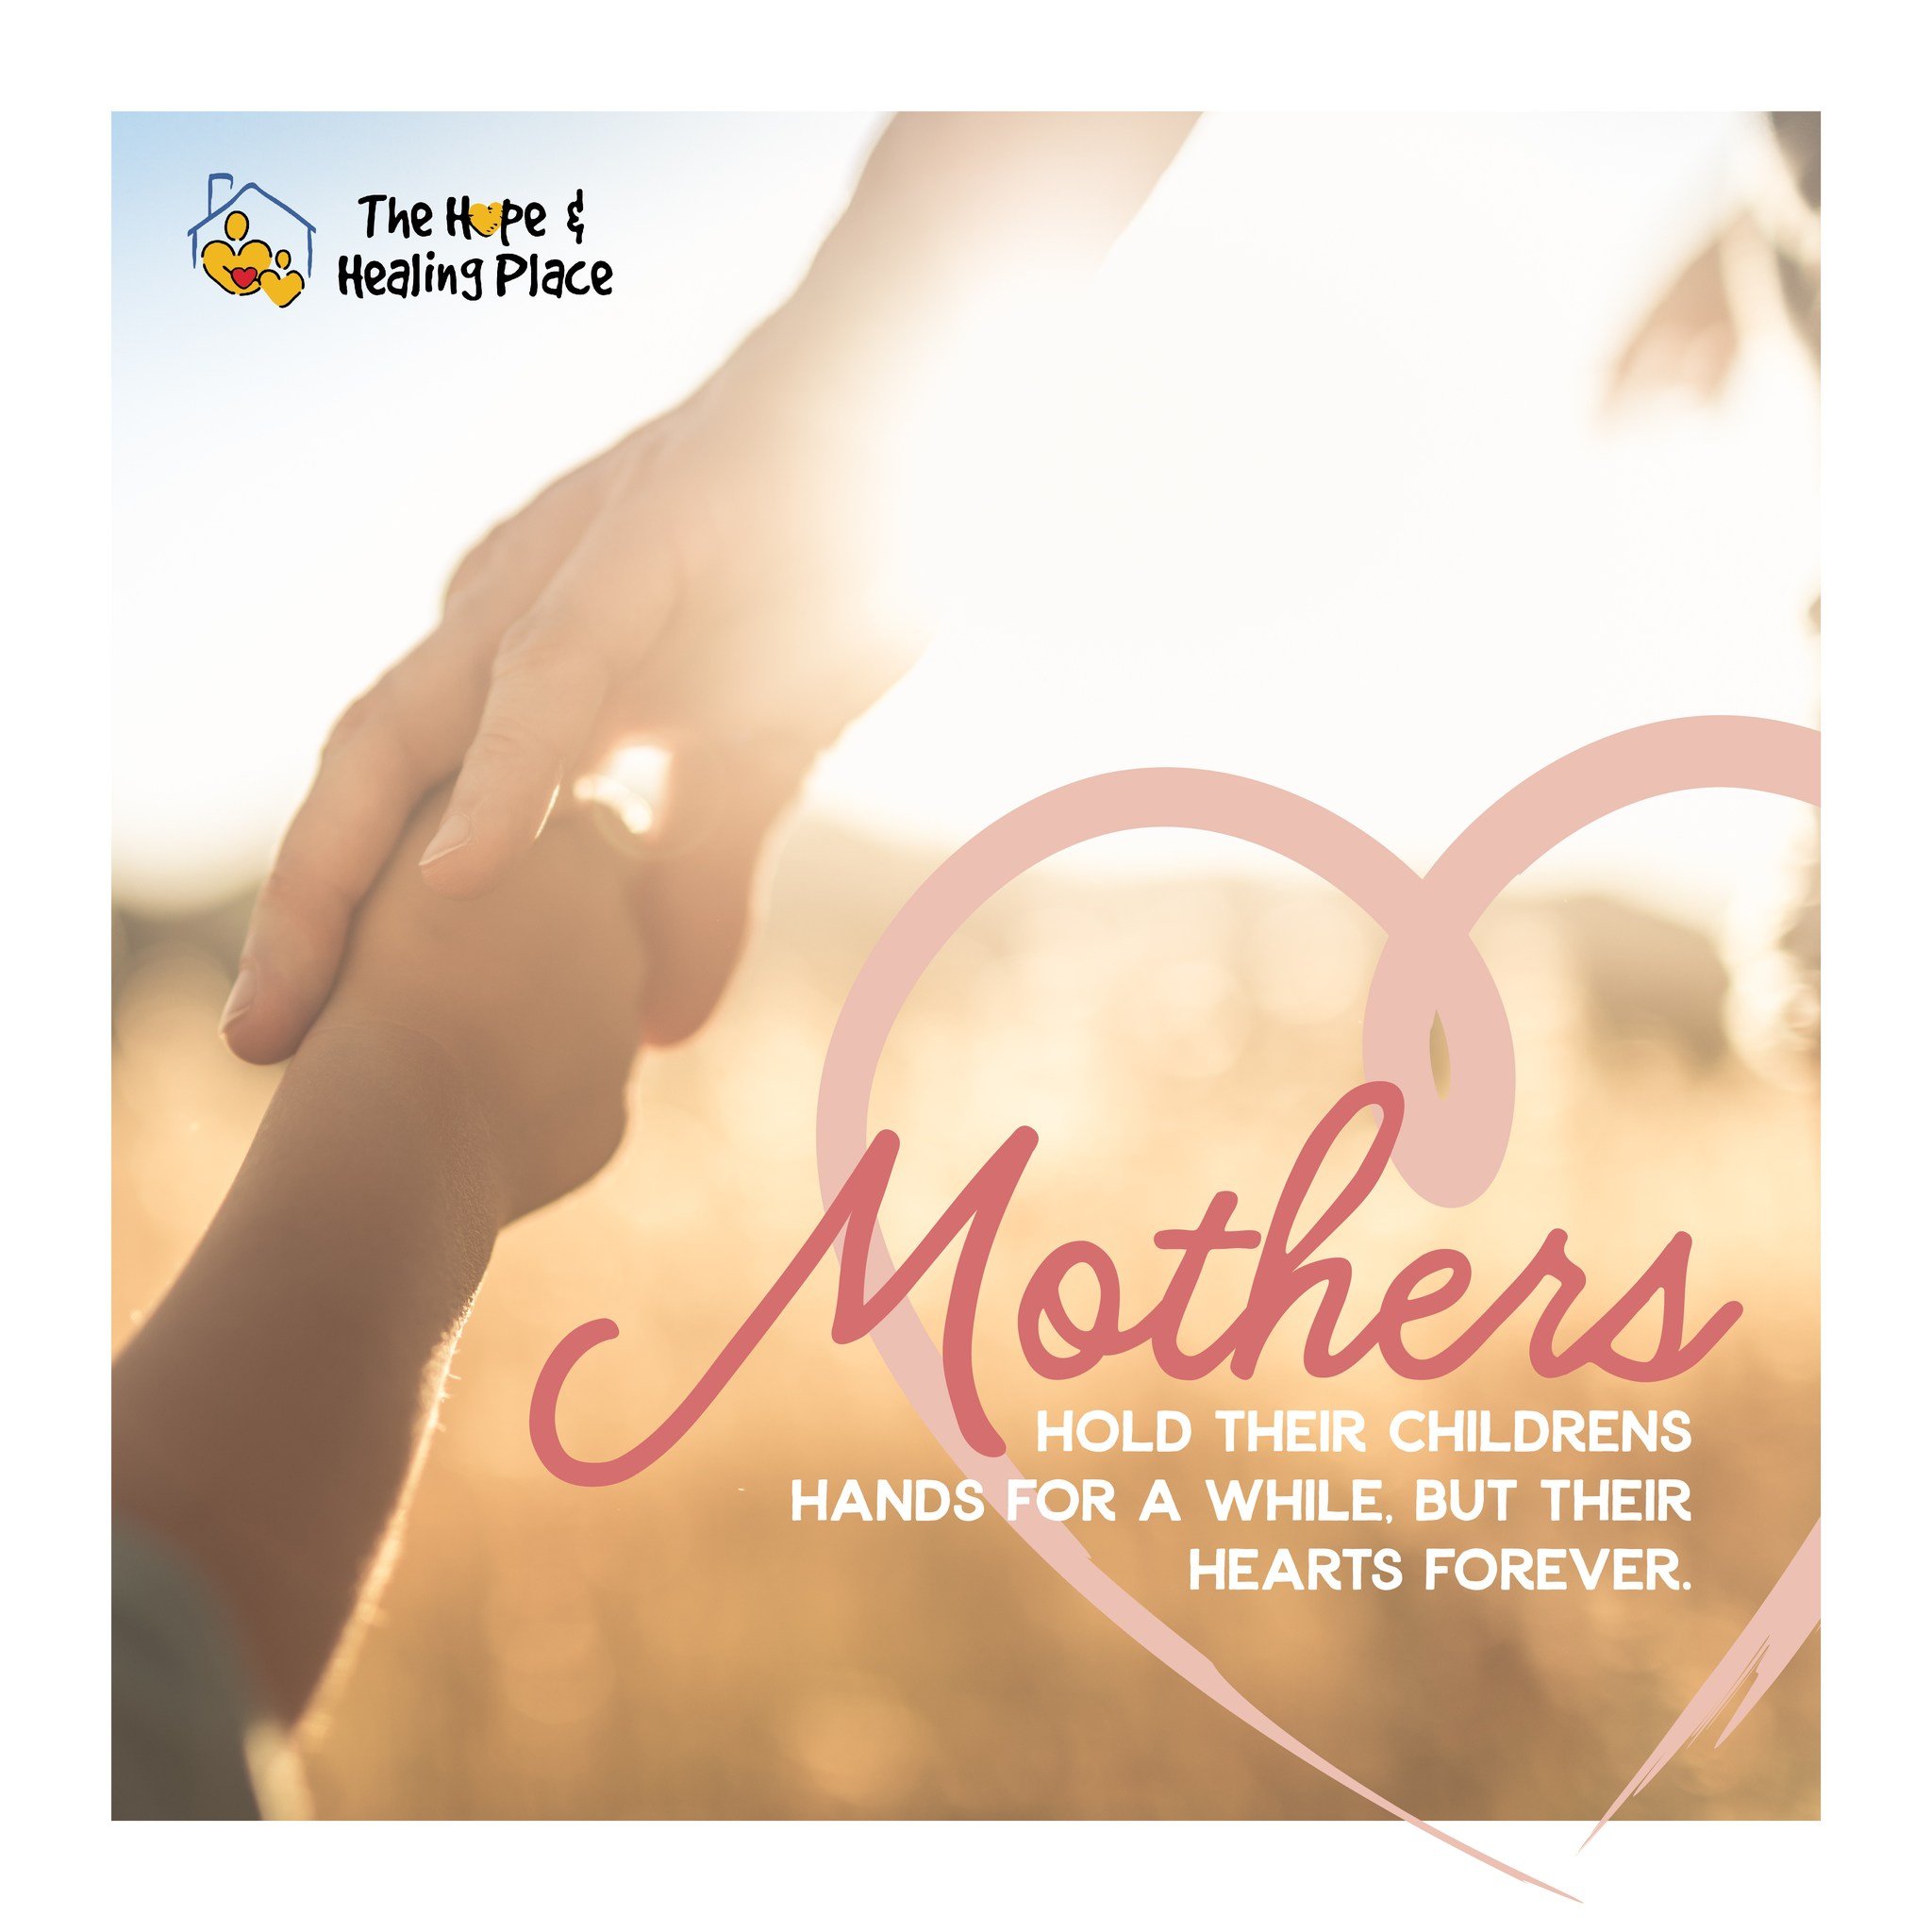 Today is Bereaved Mother&rsquo;s Day 💞

Bereaved Mother's Day is a significant day when the world pauses to acknowledge that even though your child may not be physically present, you are still a mother.

It's a day that can alleviate the conflicting